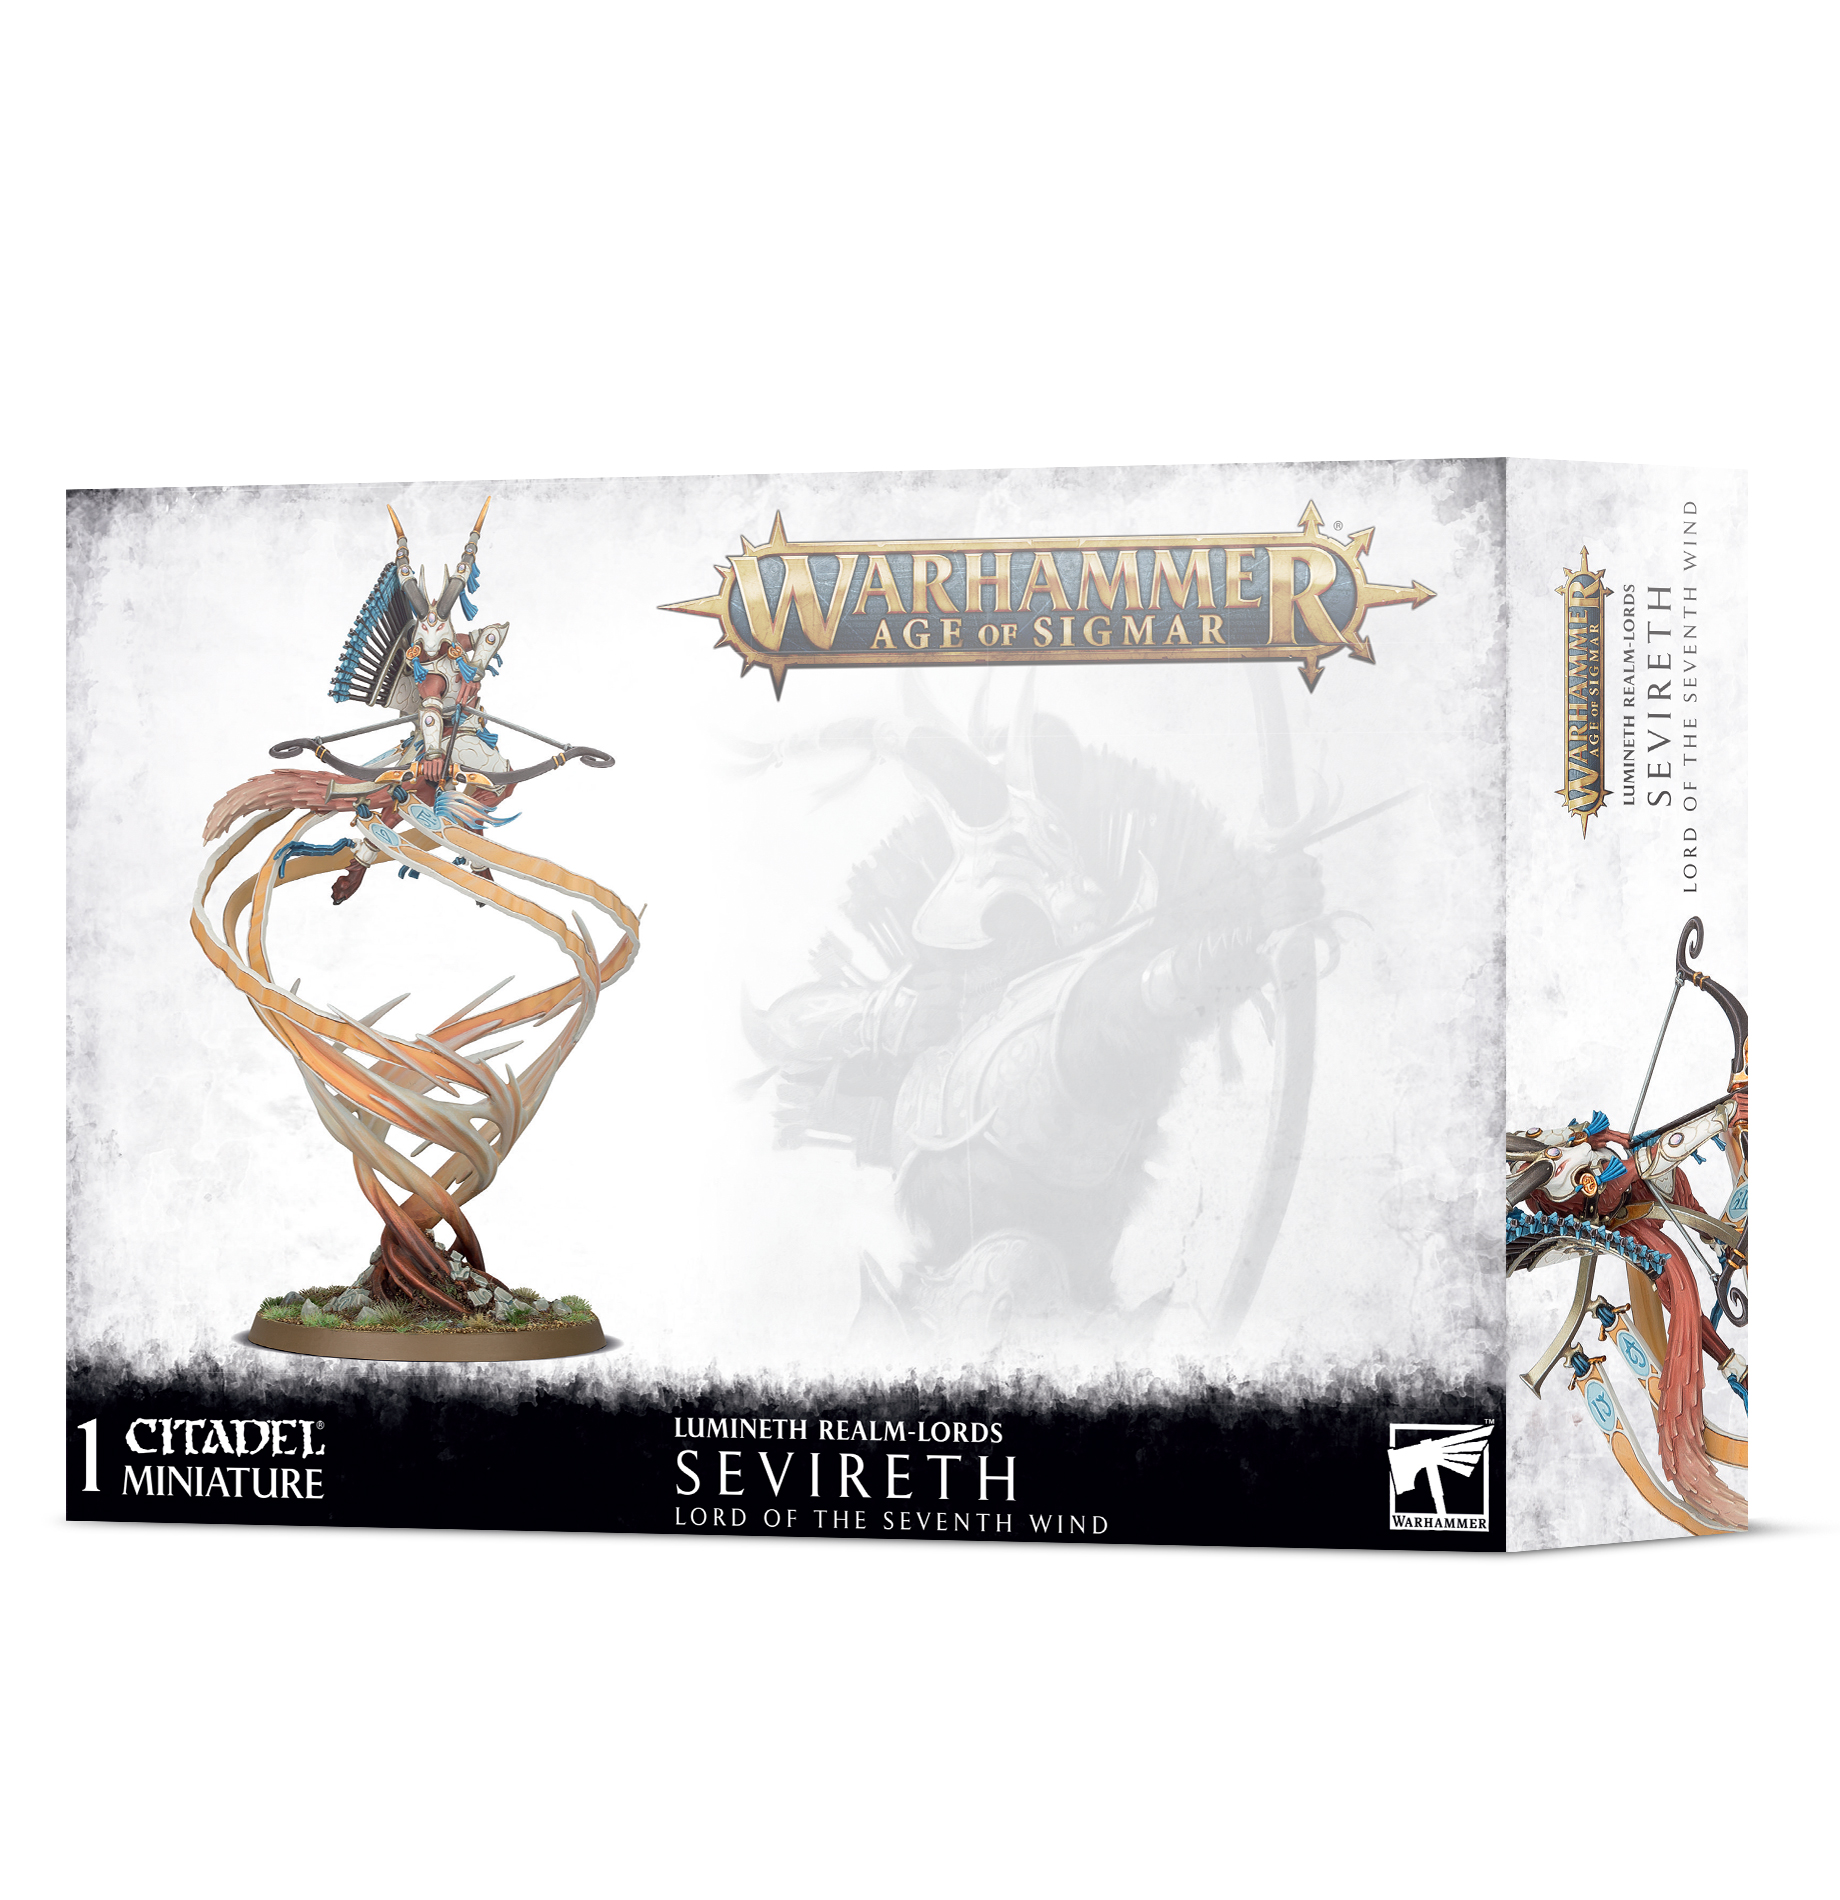 Sevireth, Lord of the Seventh Wind - 87-22 - Lumineth Realm-Lords - Warhammer Age of Sigmar